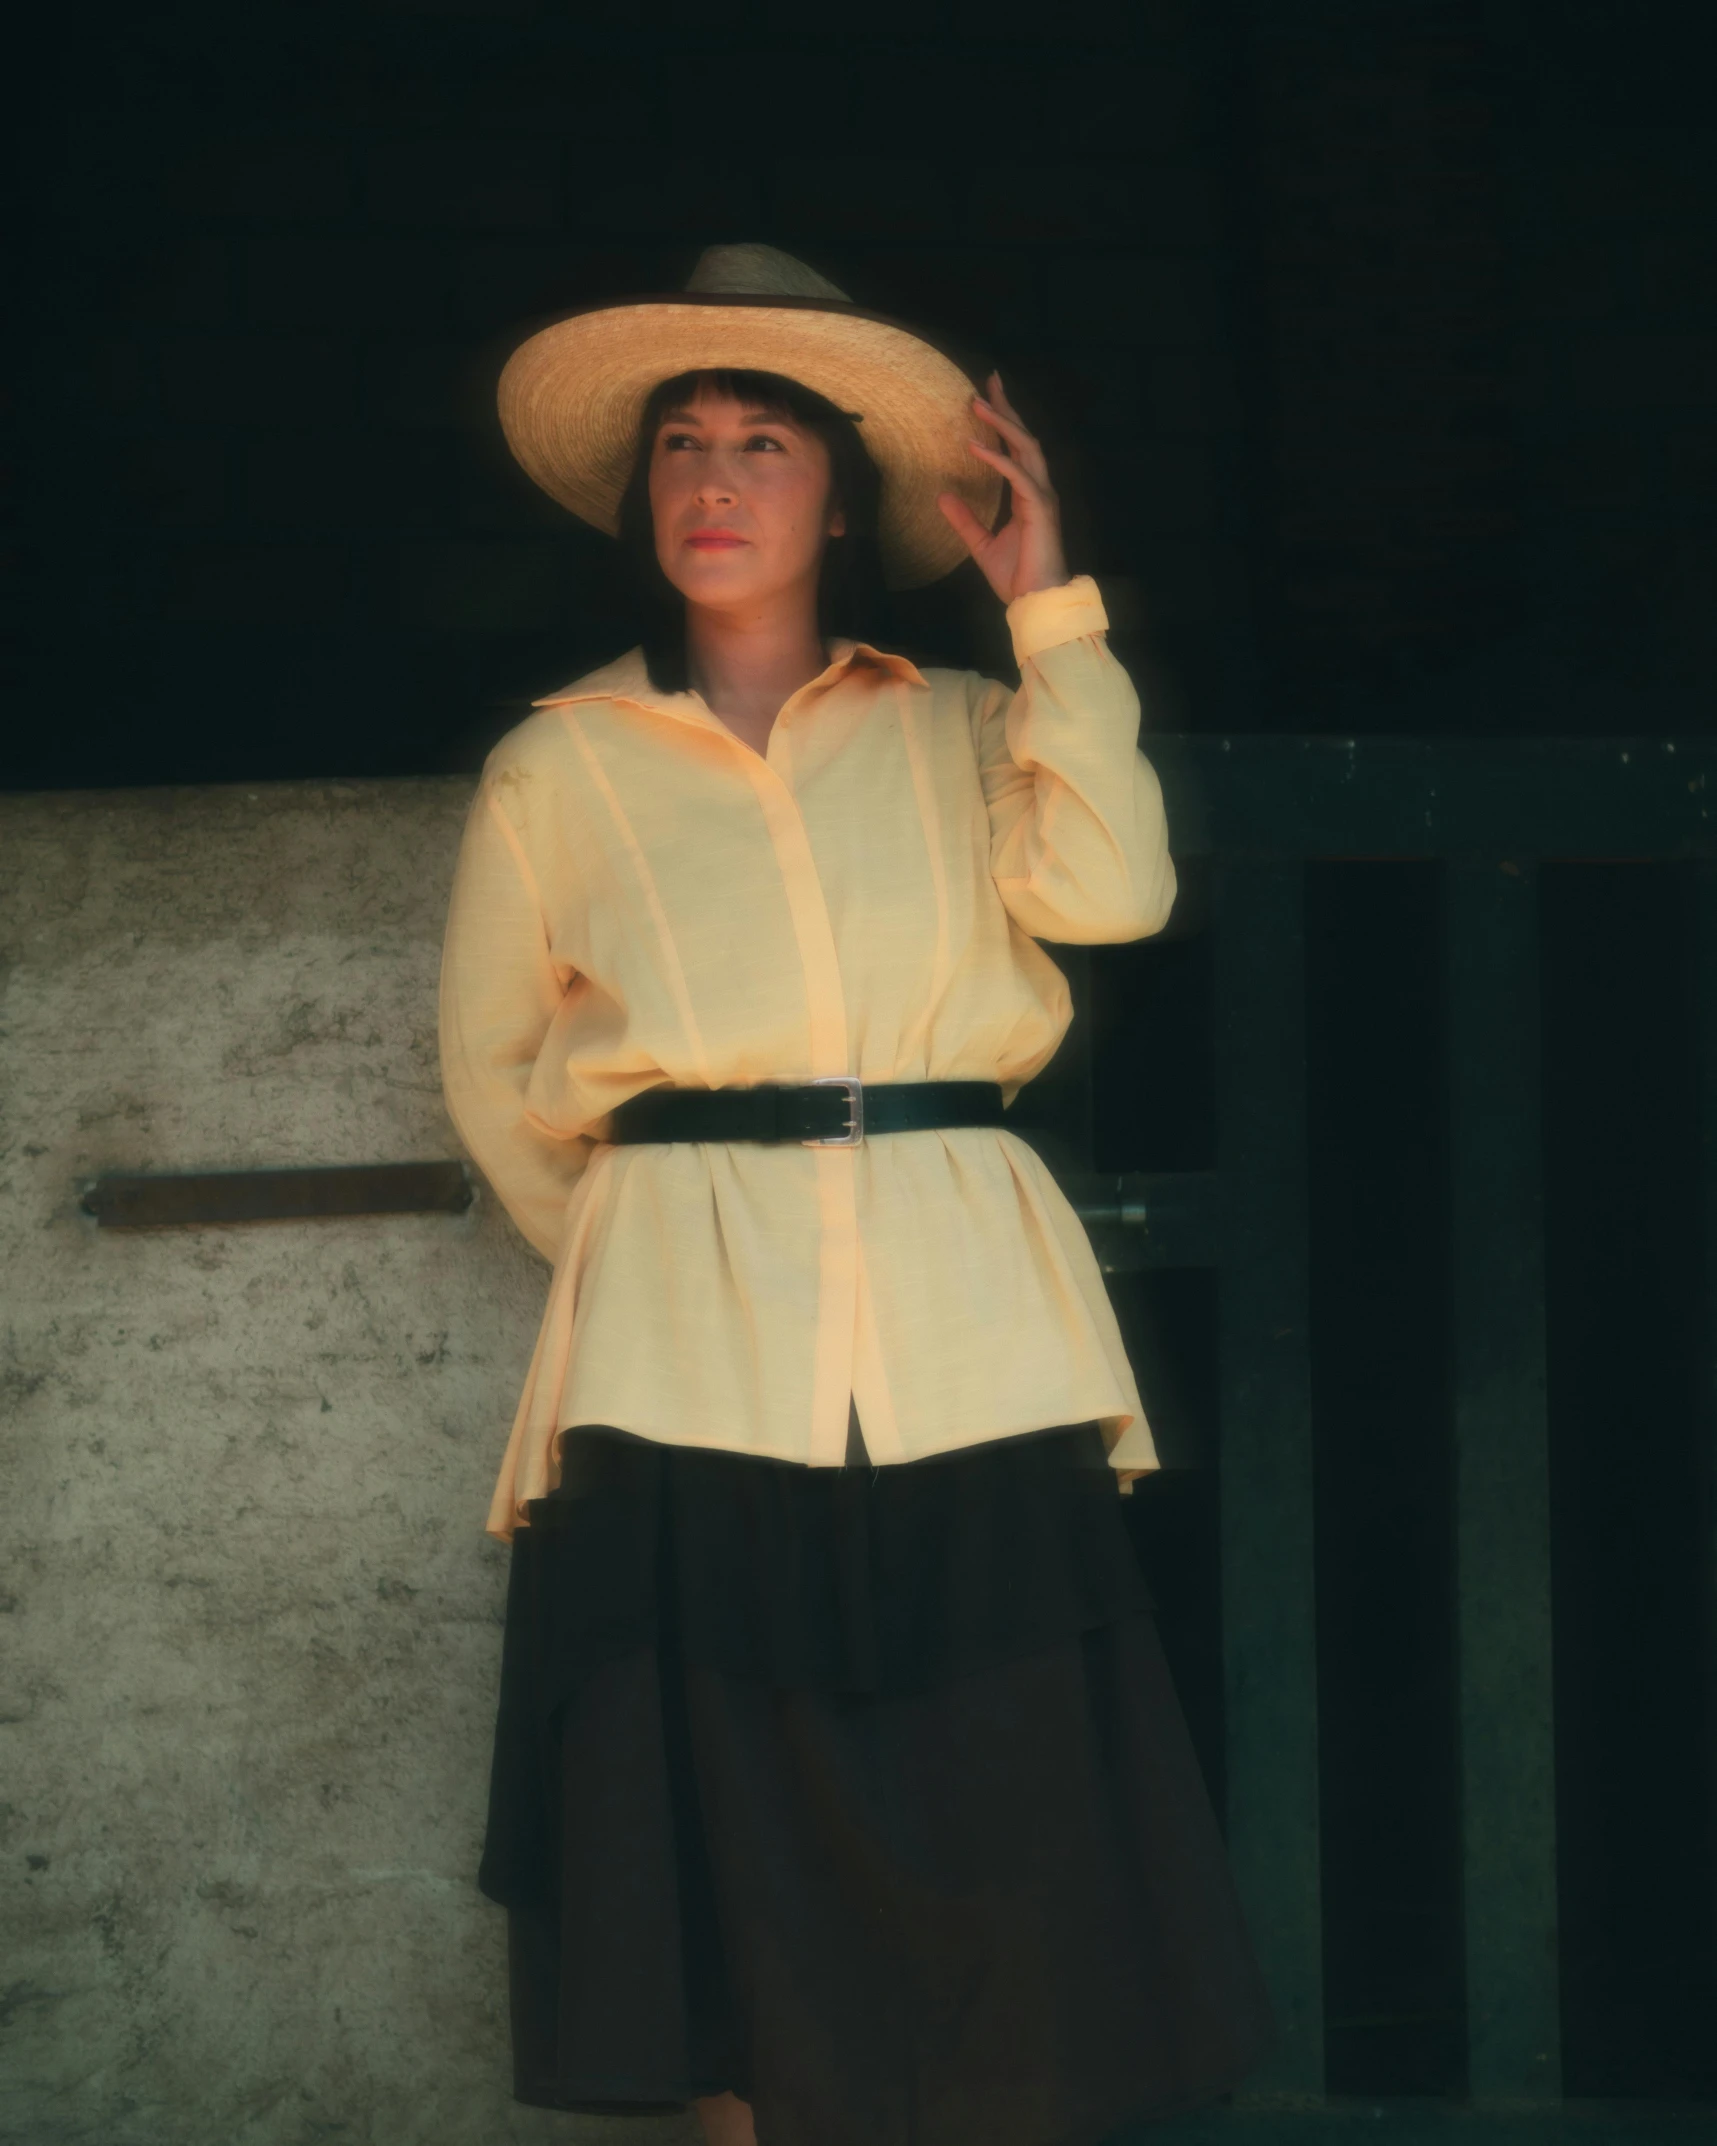 an image of woman in dress attire with hat standing in the dark